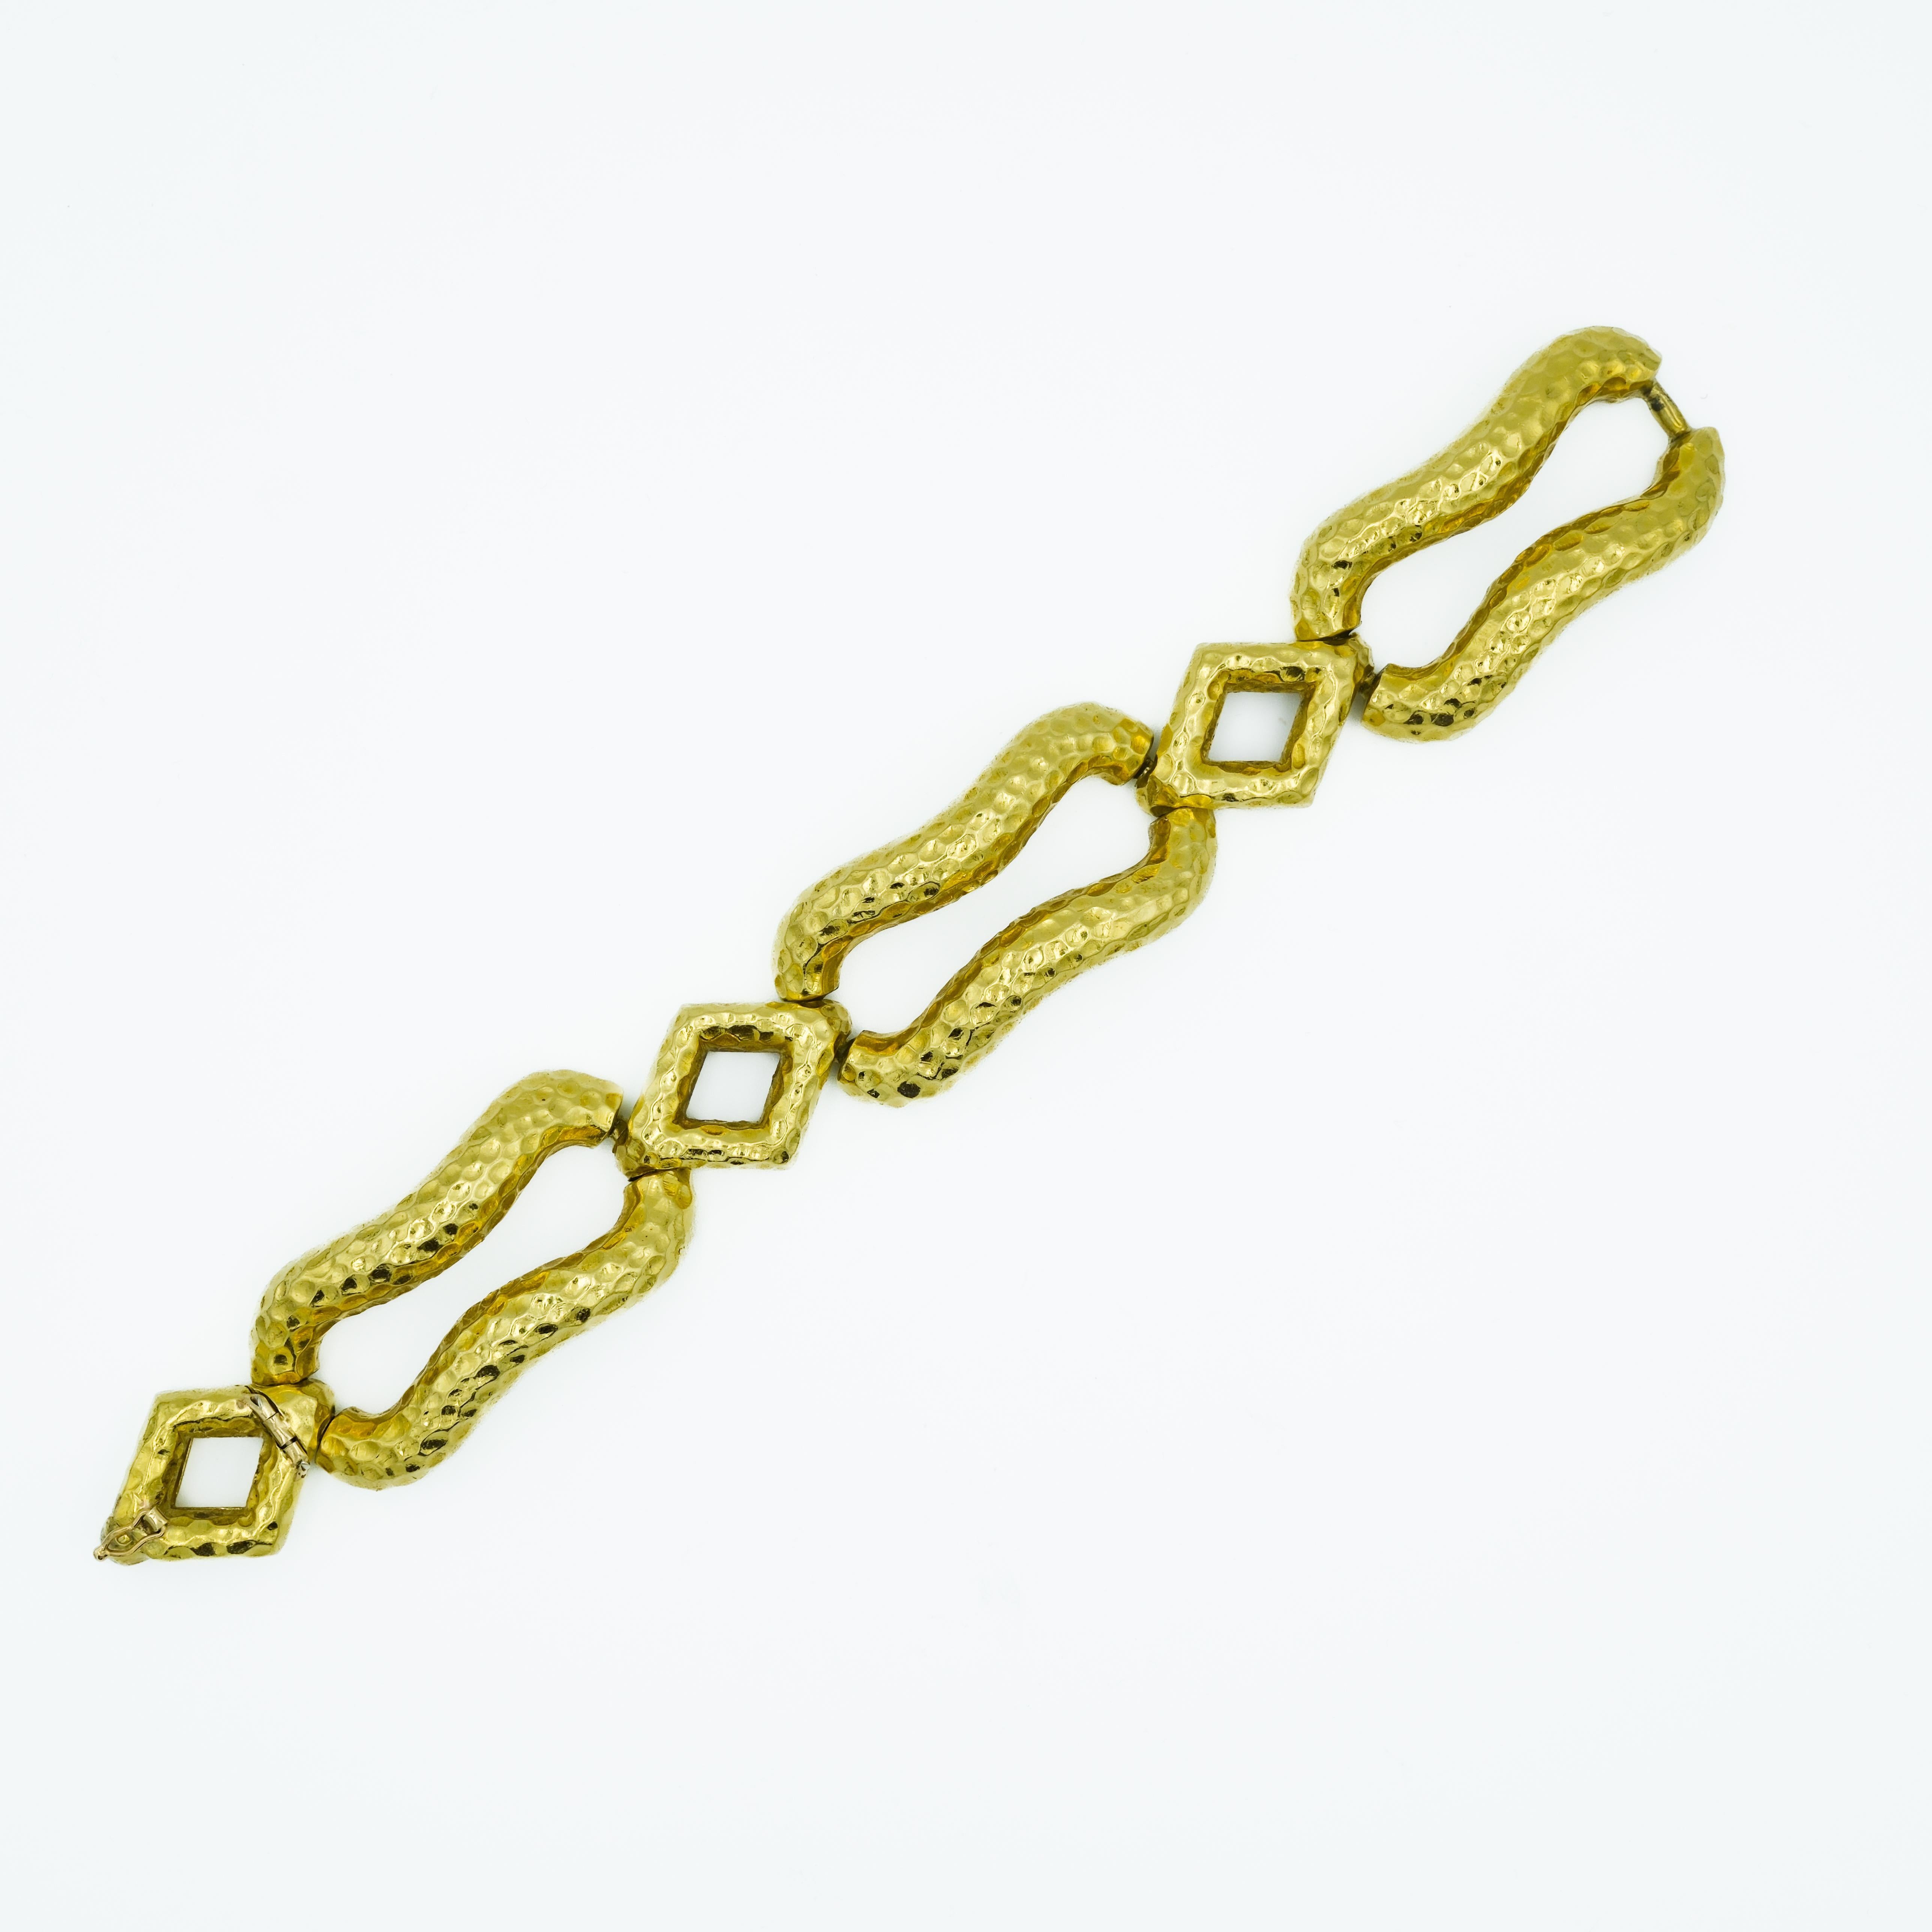 This Mid-Century modernist bracelet is crafted from 18 Karat Yellow Gold. It comprises a series of textured, hammered links. Each link presents a unique form, alternating between modified, rounded rectangular shapes and connectors, creating a bold,